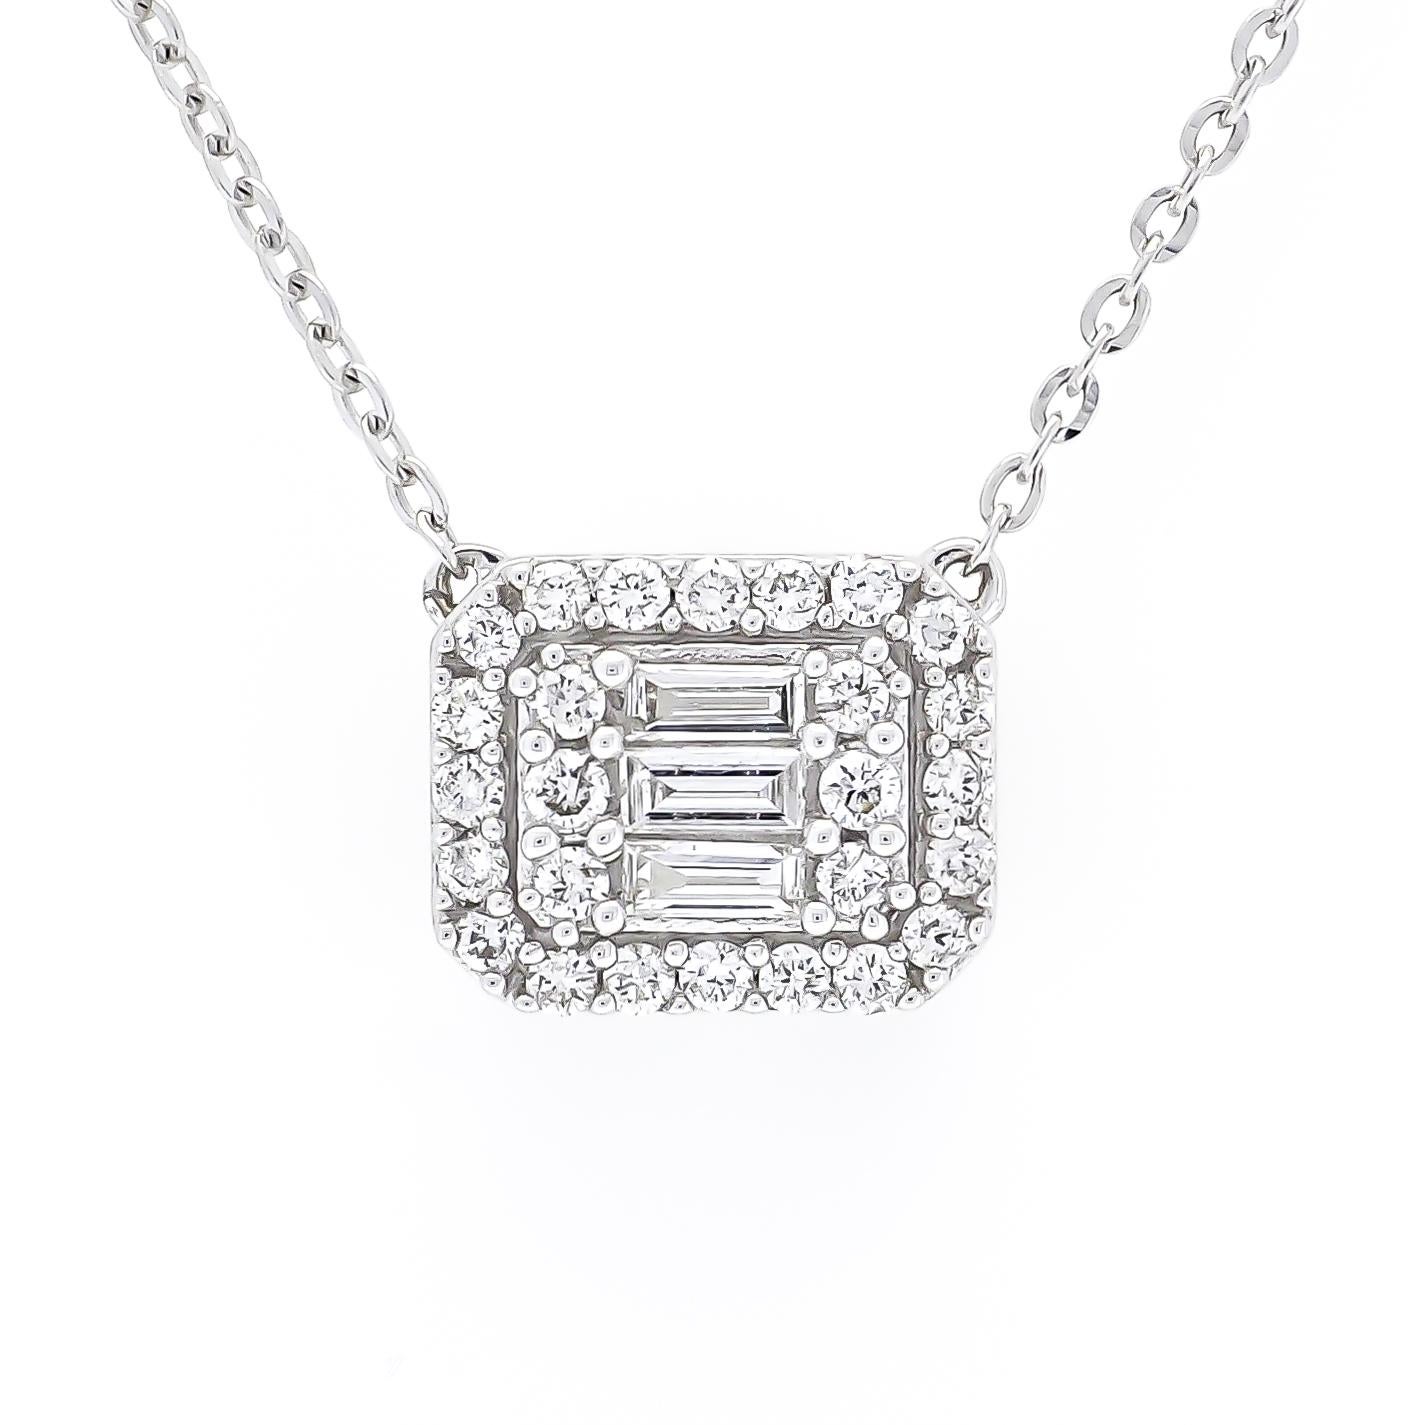 At its core, the pendant showcases a captivating cluster of baguette and round diamonds, meticulously arranged to create a stunning visual impact. The interplay of shapes and cuts adds depth and dimension to the design, while the brilliance of the